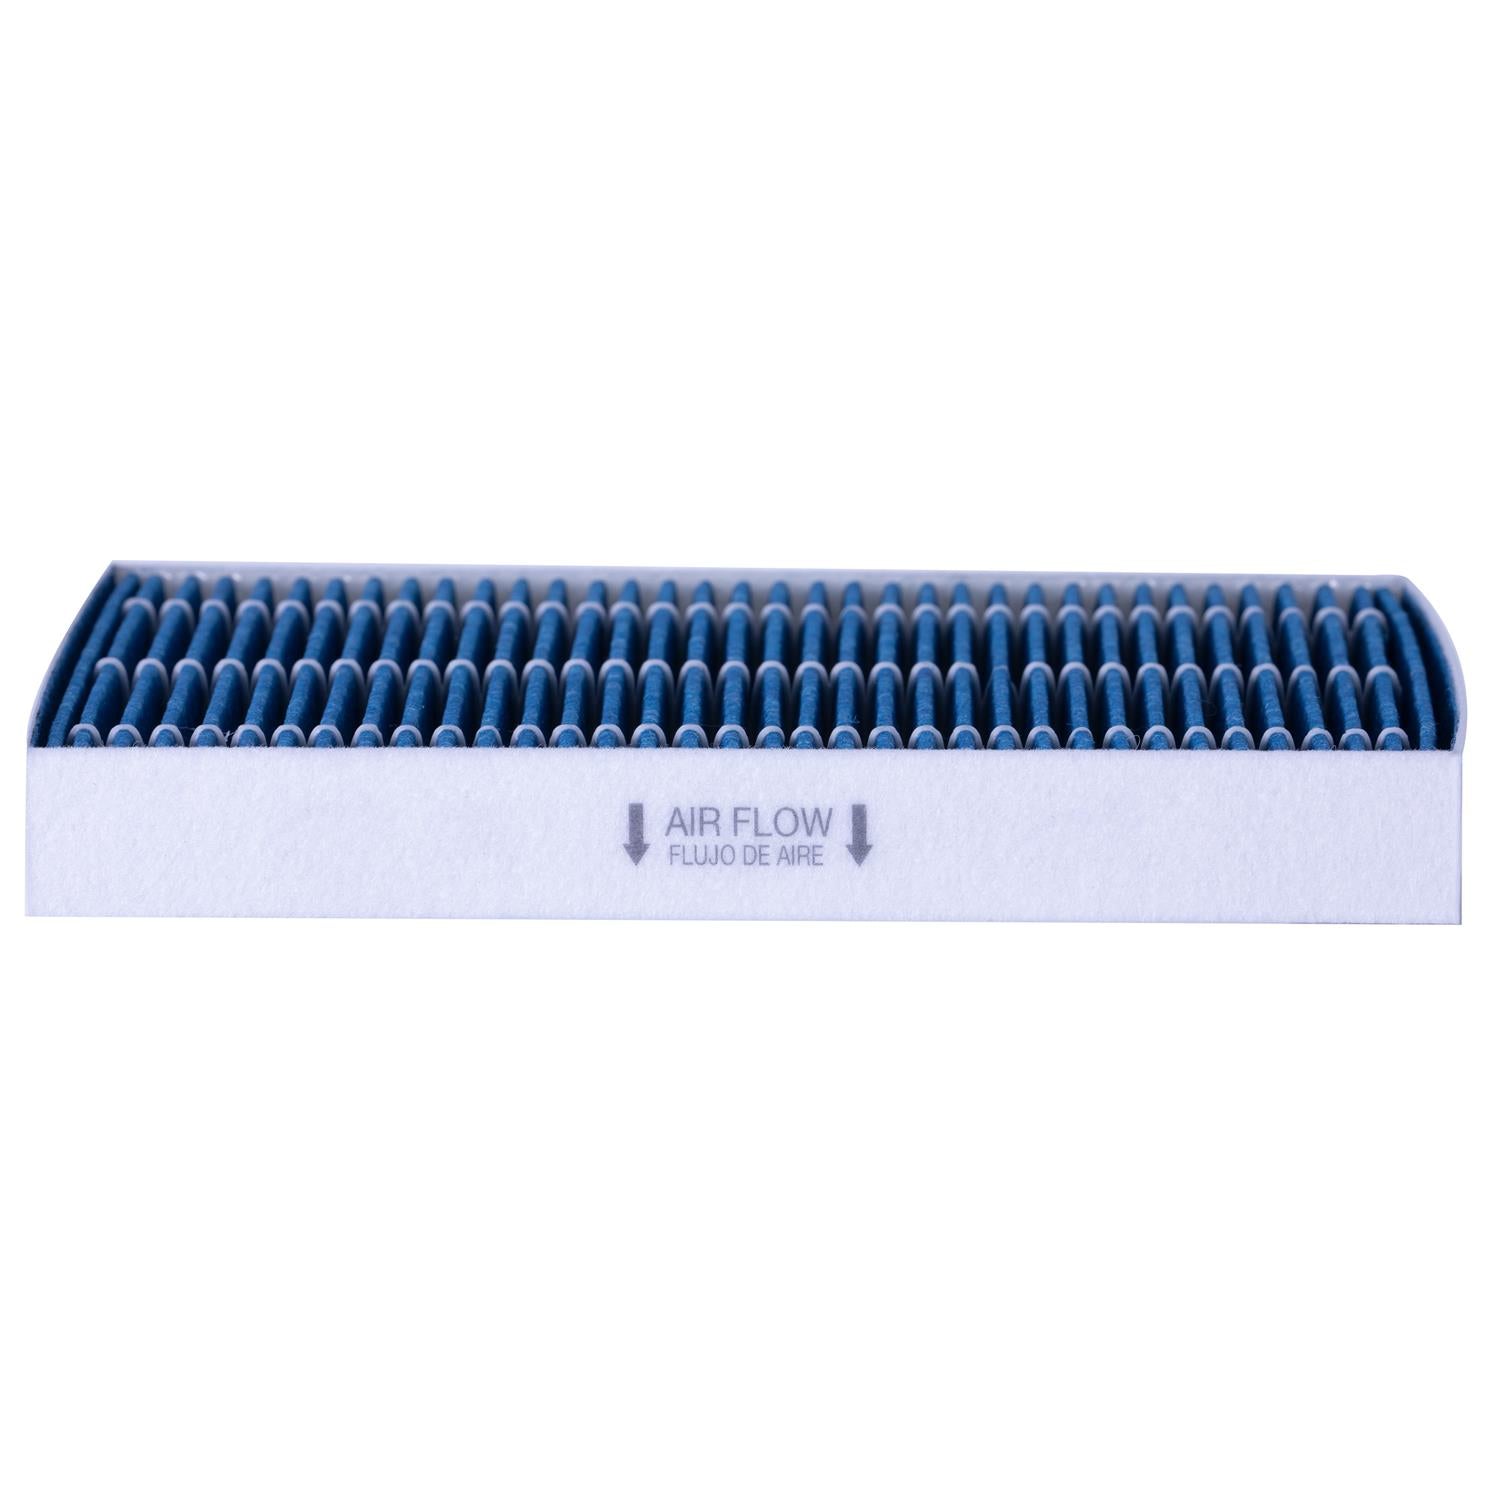 PUREFLOW 2020 Audi A3 Quattro Cabin Air Filter with HEPA and Antibacterial Technology, PC99204HX